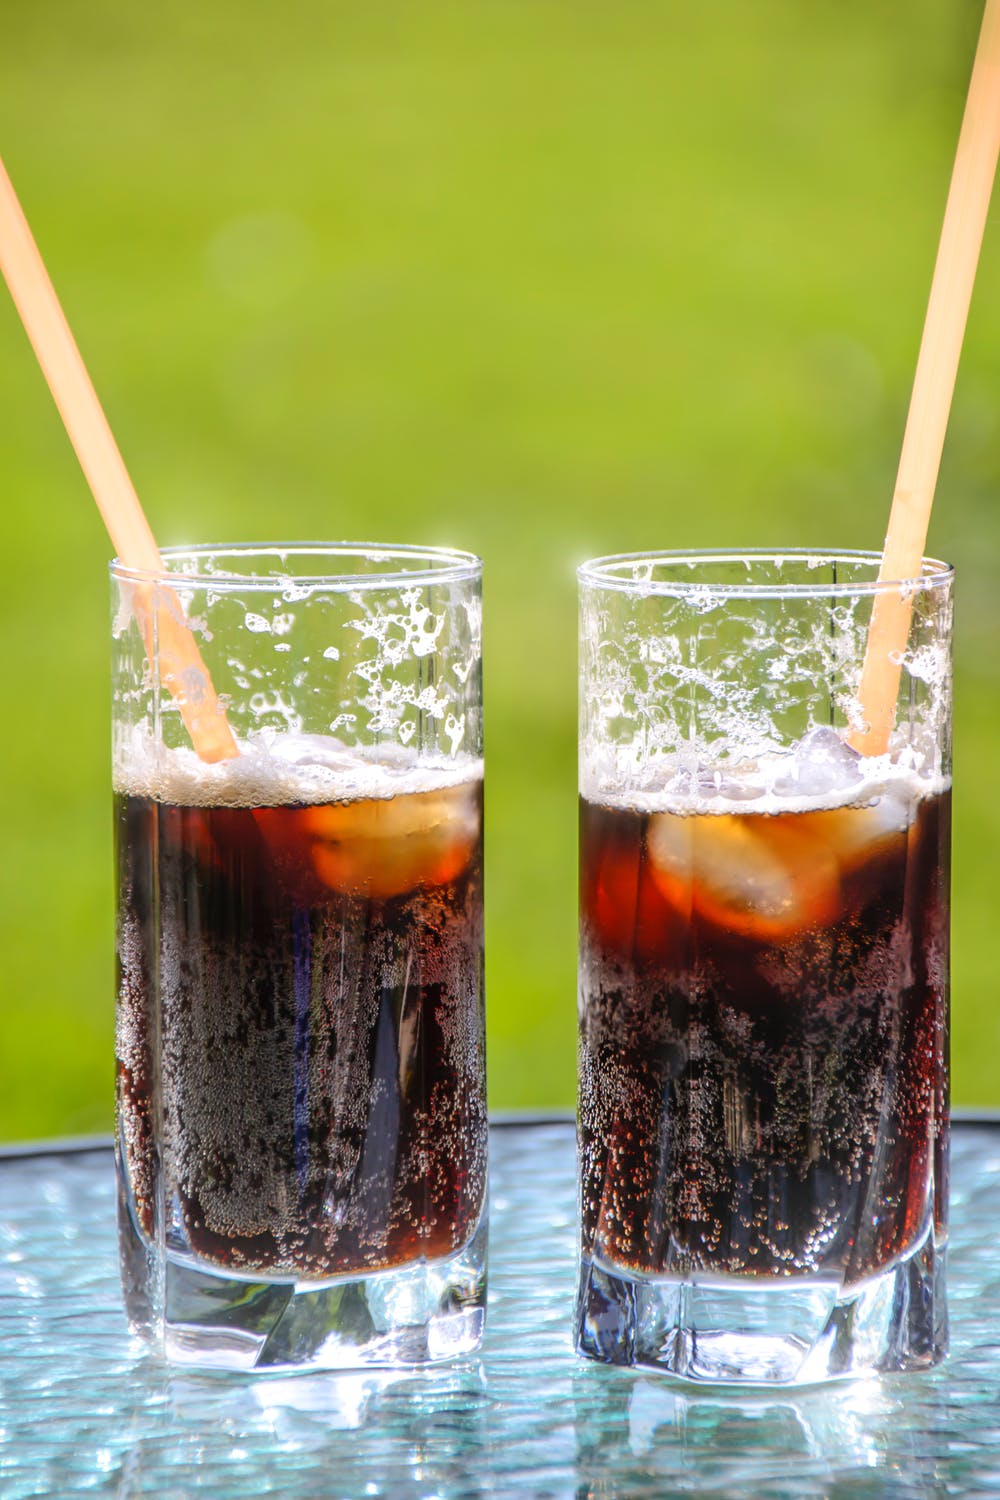 Homemade soda in two glasses outdoors.